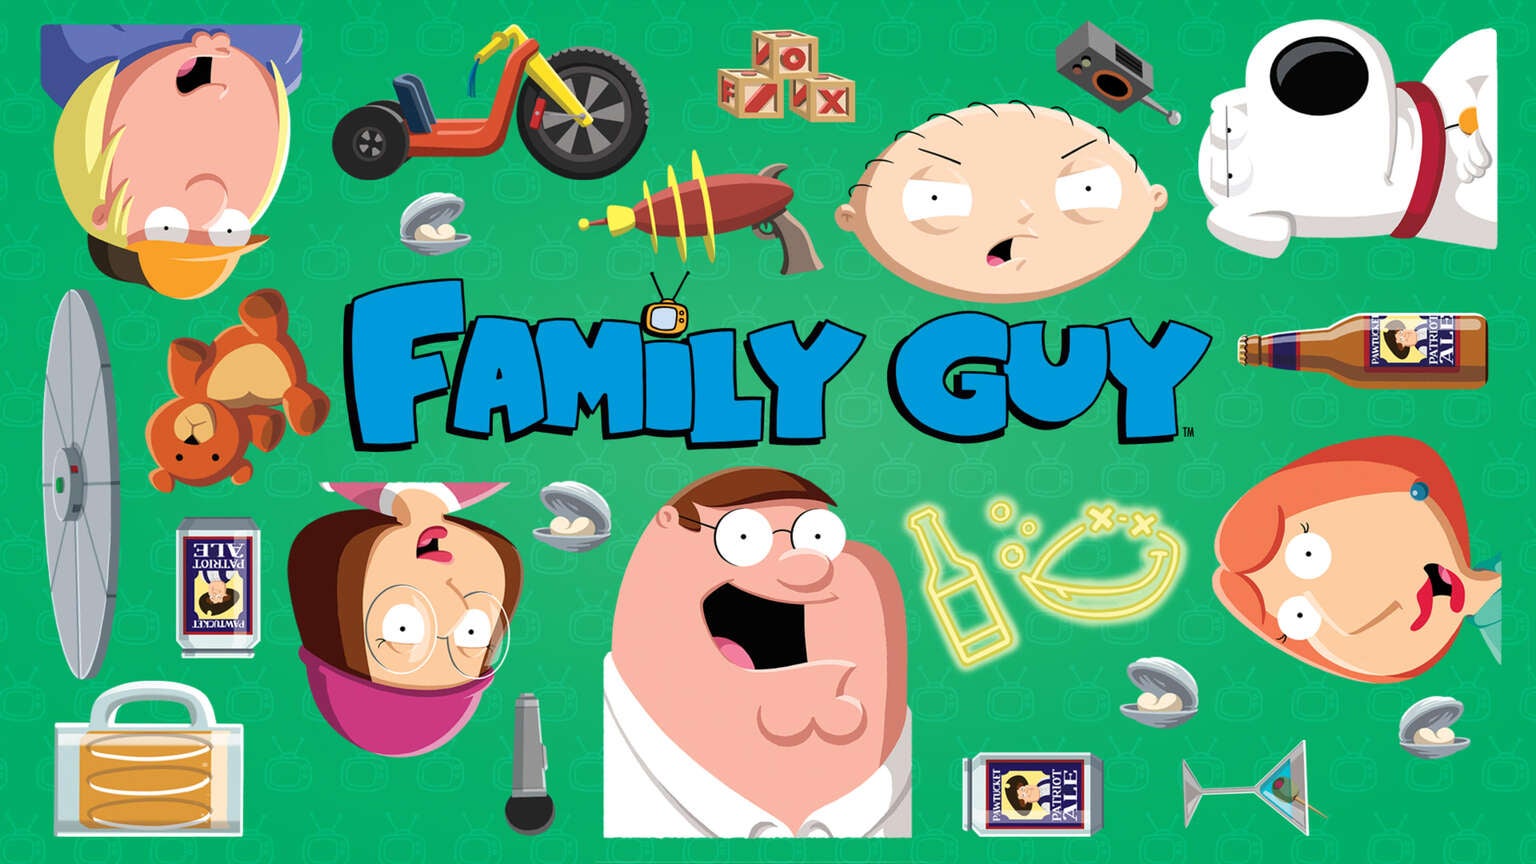 How to Watch the 'Family Guy' Season Premiere For Free on Apple TV